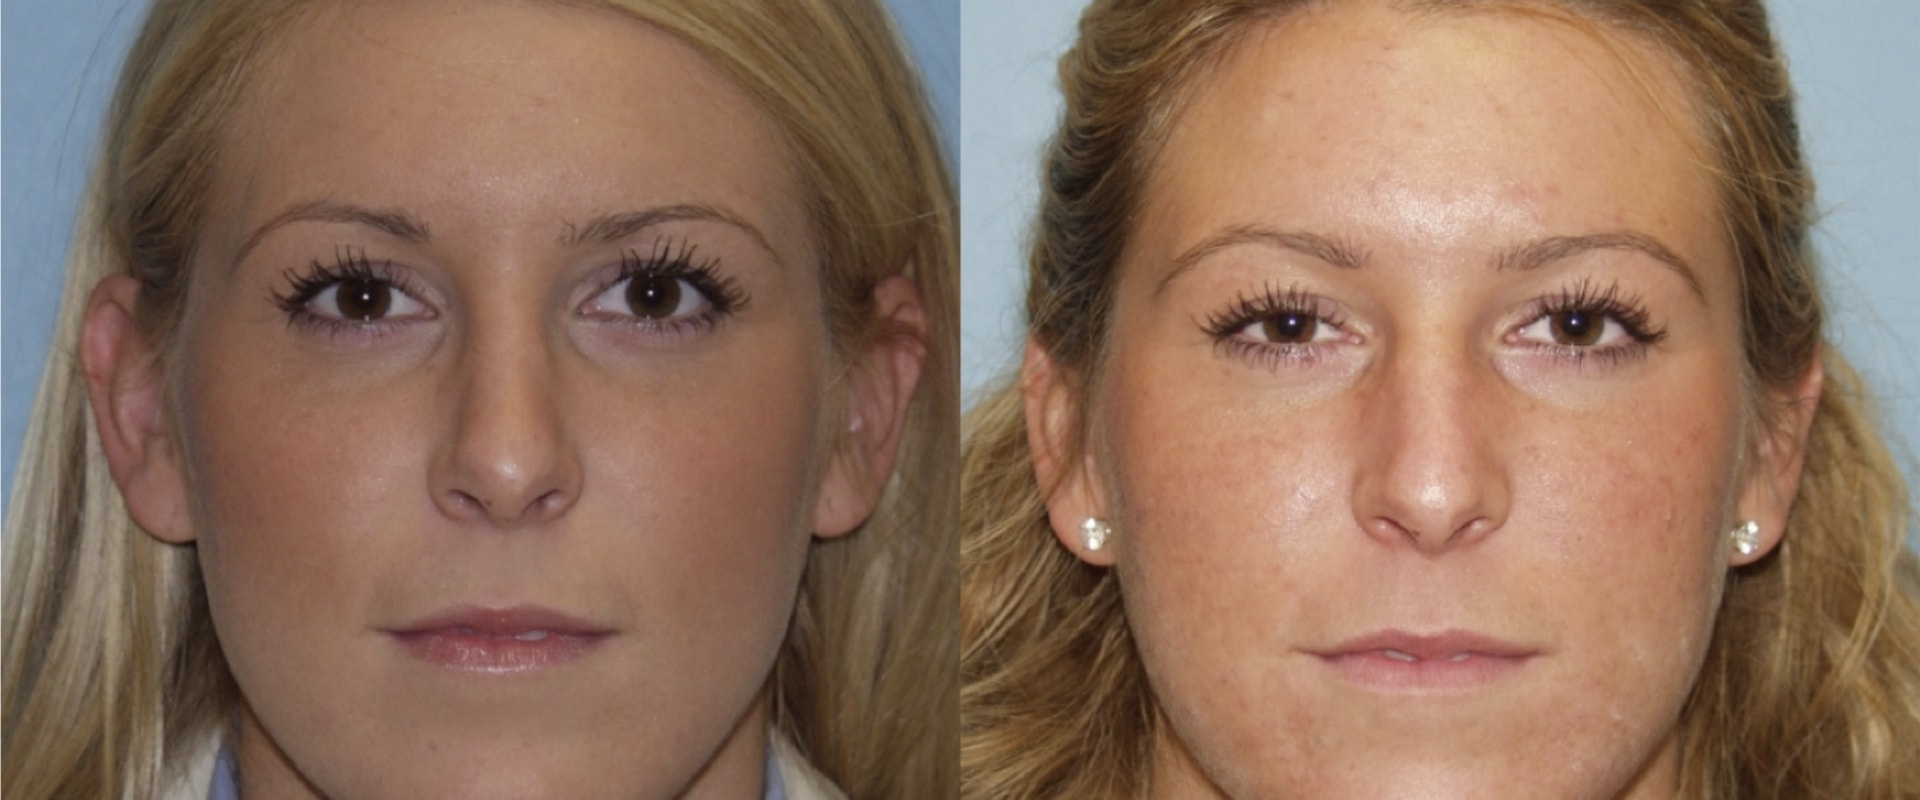 Who is the top rhinoplasty doctor in usa?